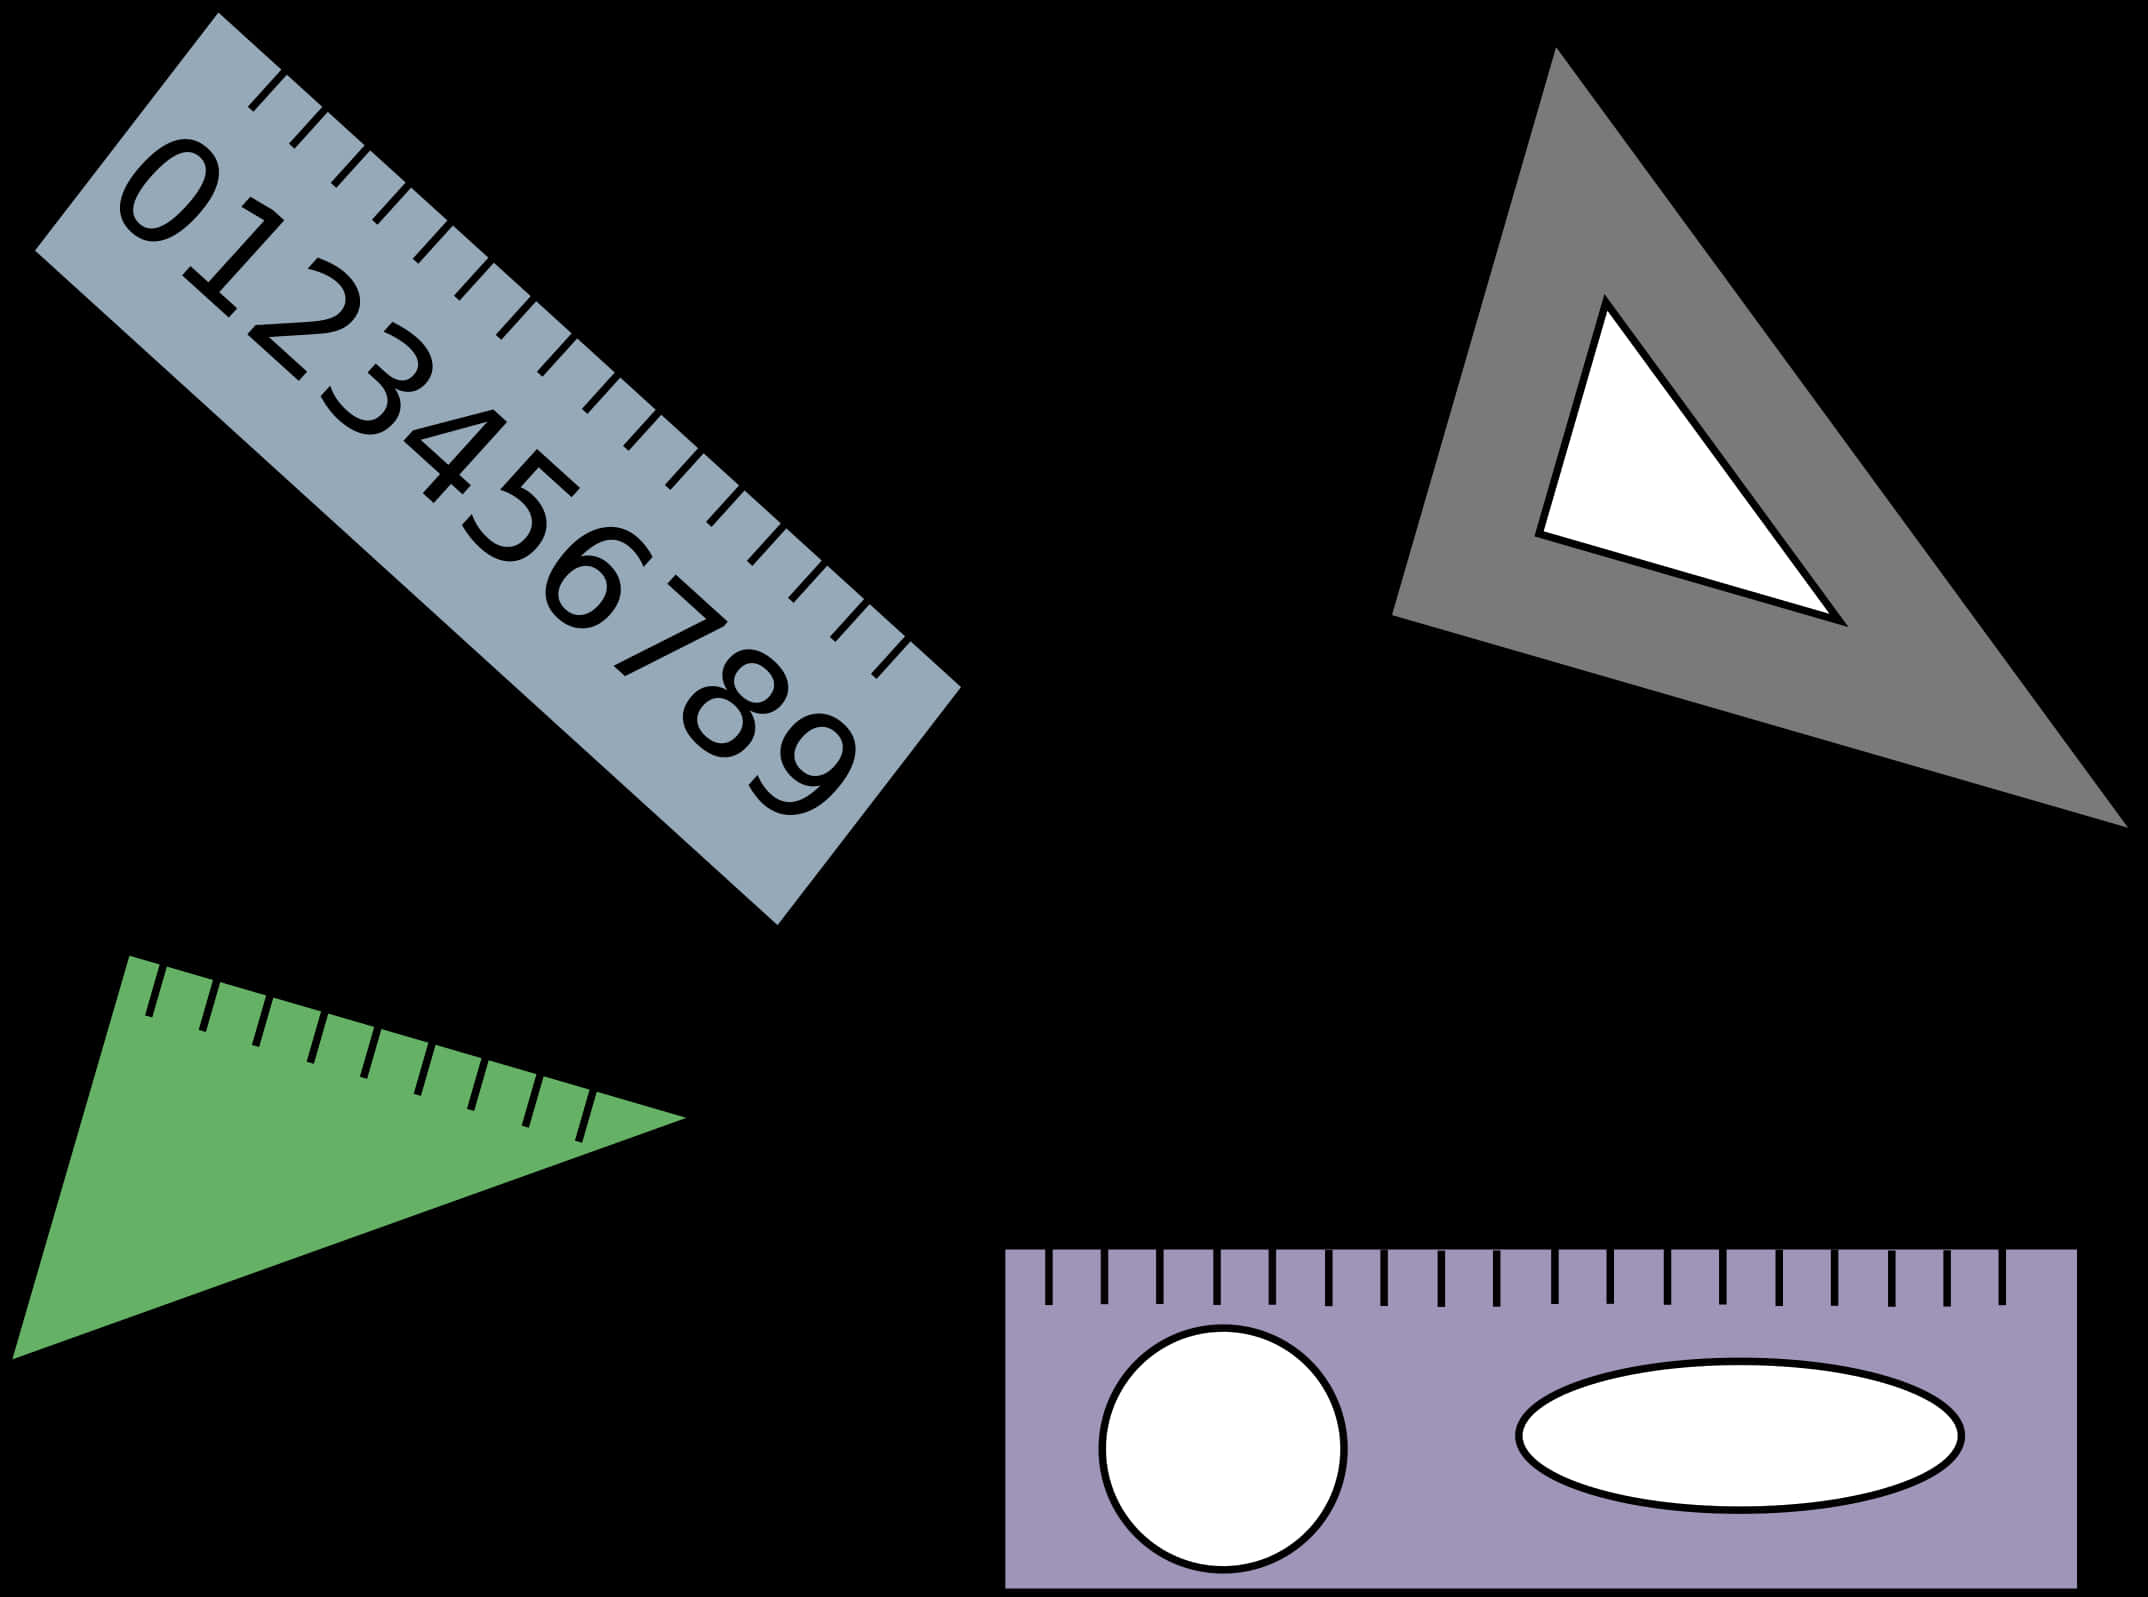 A Group Of Rulers With Numbers And Circles